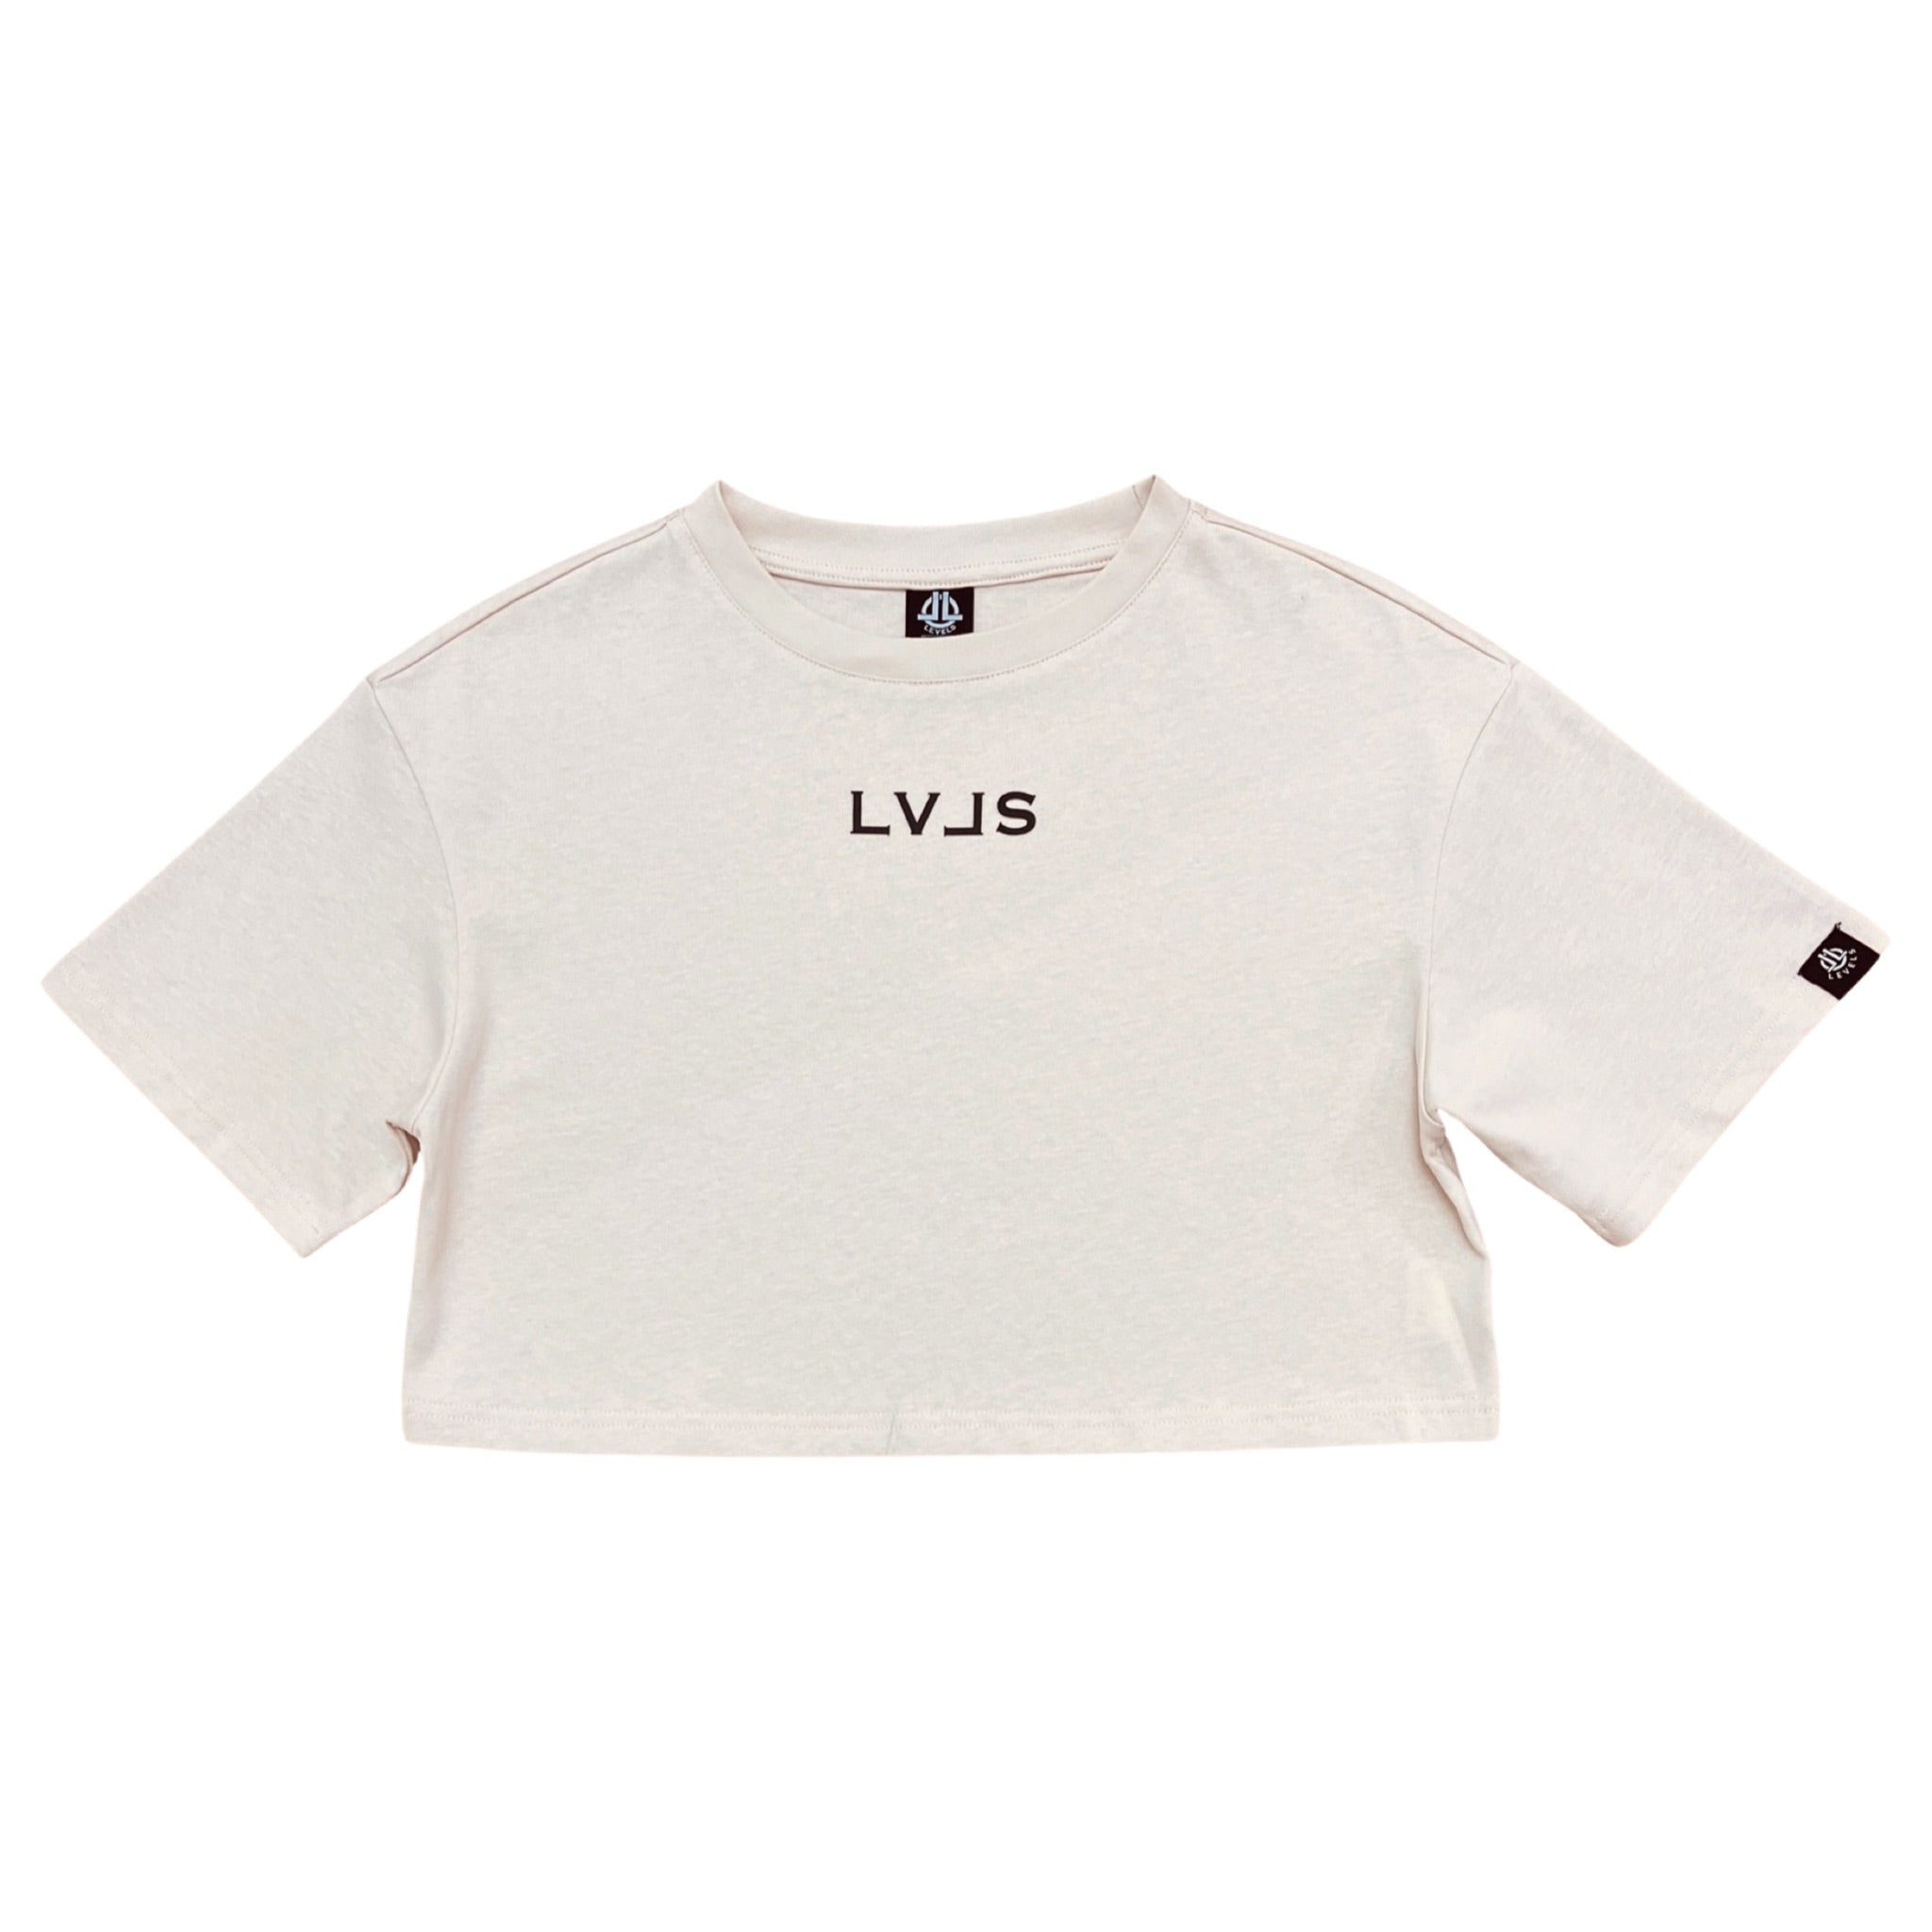 LEVELS, LLC Apparel & Accessories LEVELS OVERSIZED CROP TEE (NUDE)